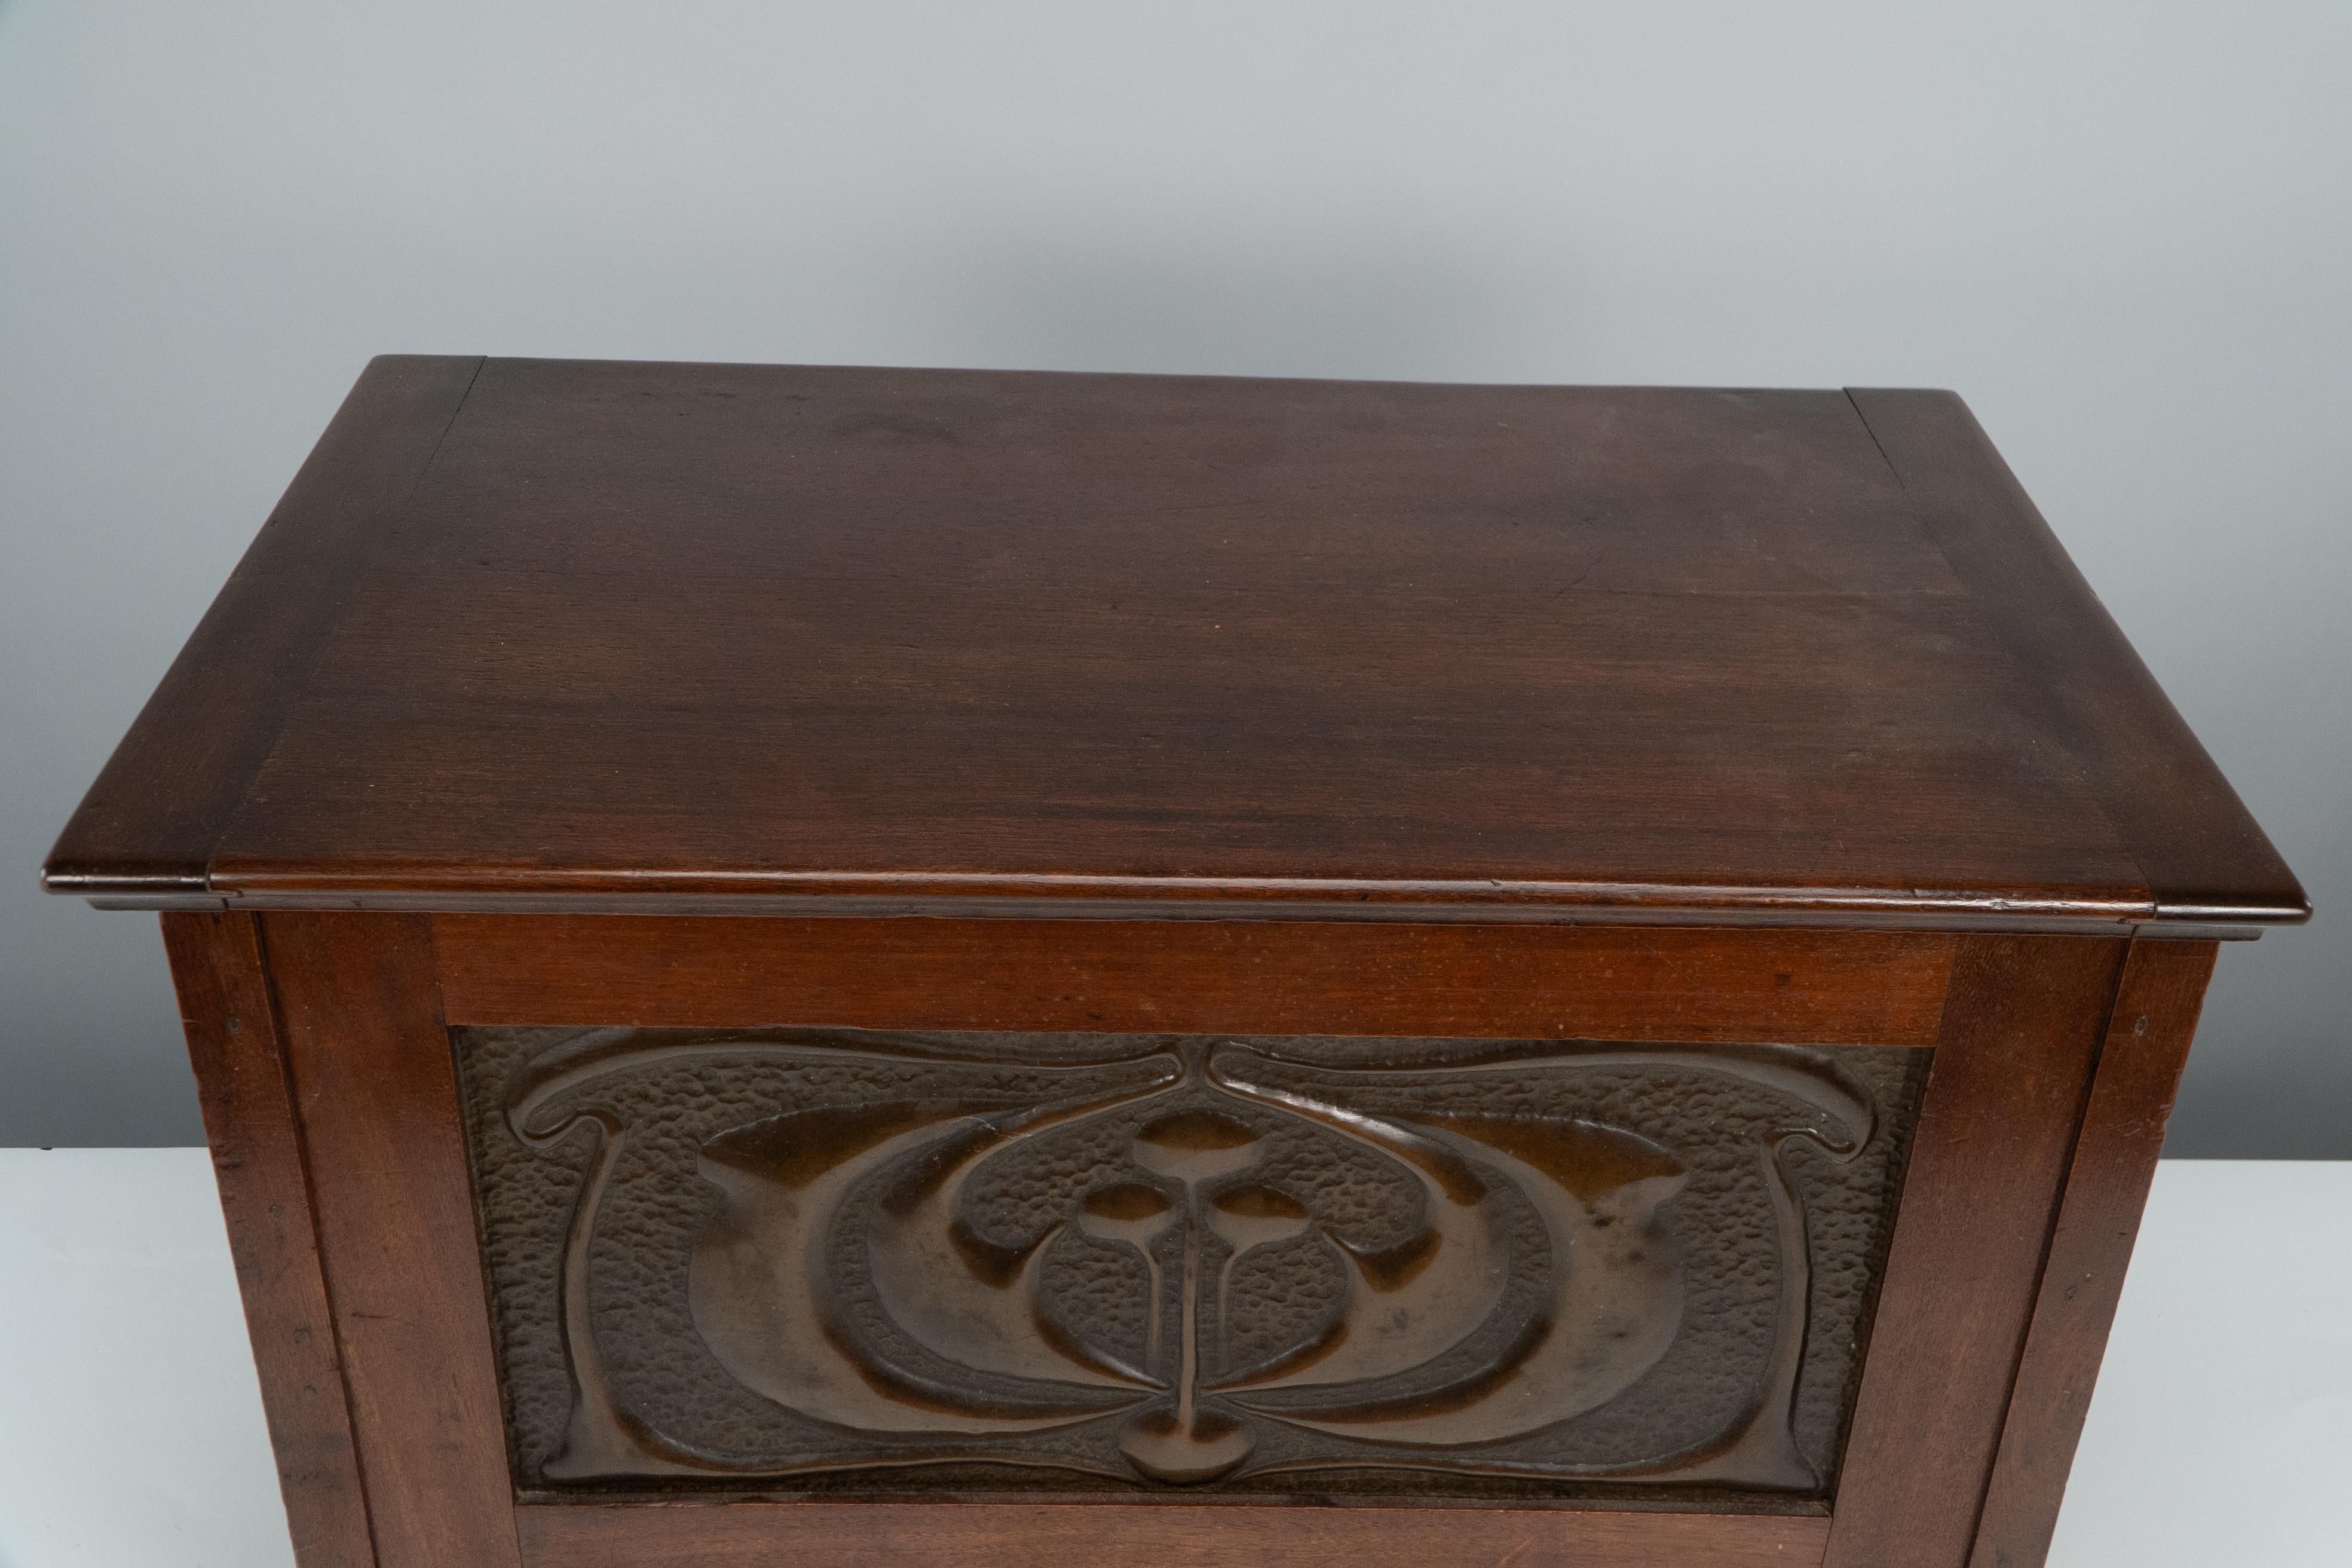 Mahogany Liberty and Co. A small trunk with copper panels in the style of C R Mackintosh. For Sale